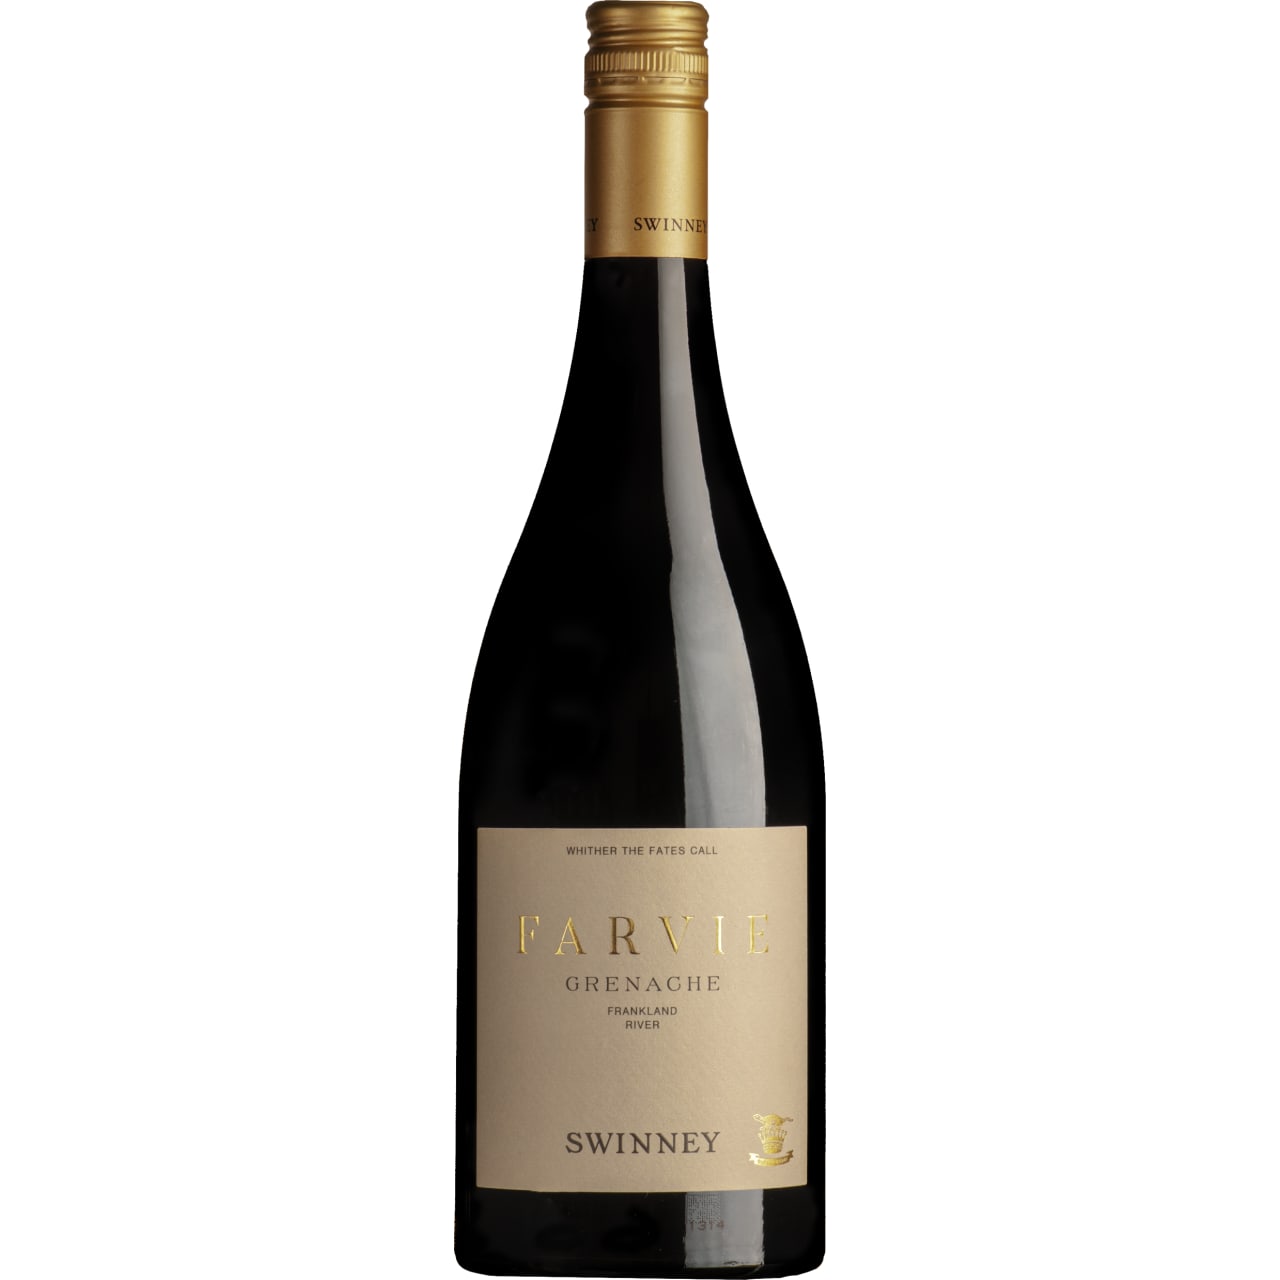 Glorious Grenache from the most exciting region of Western Australia that nobody has heard of, brimming with raspberries and blackcurrants and enveloped in a fine cloud of perfumed spice.